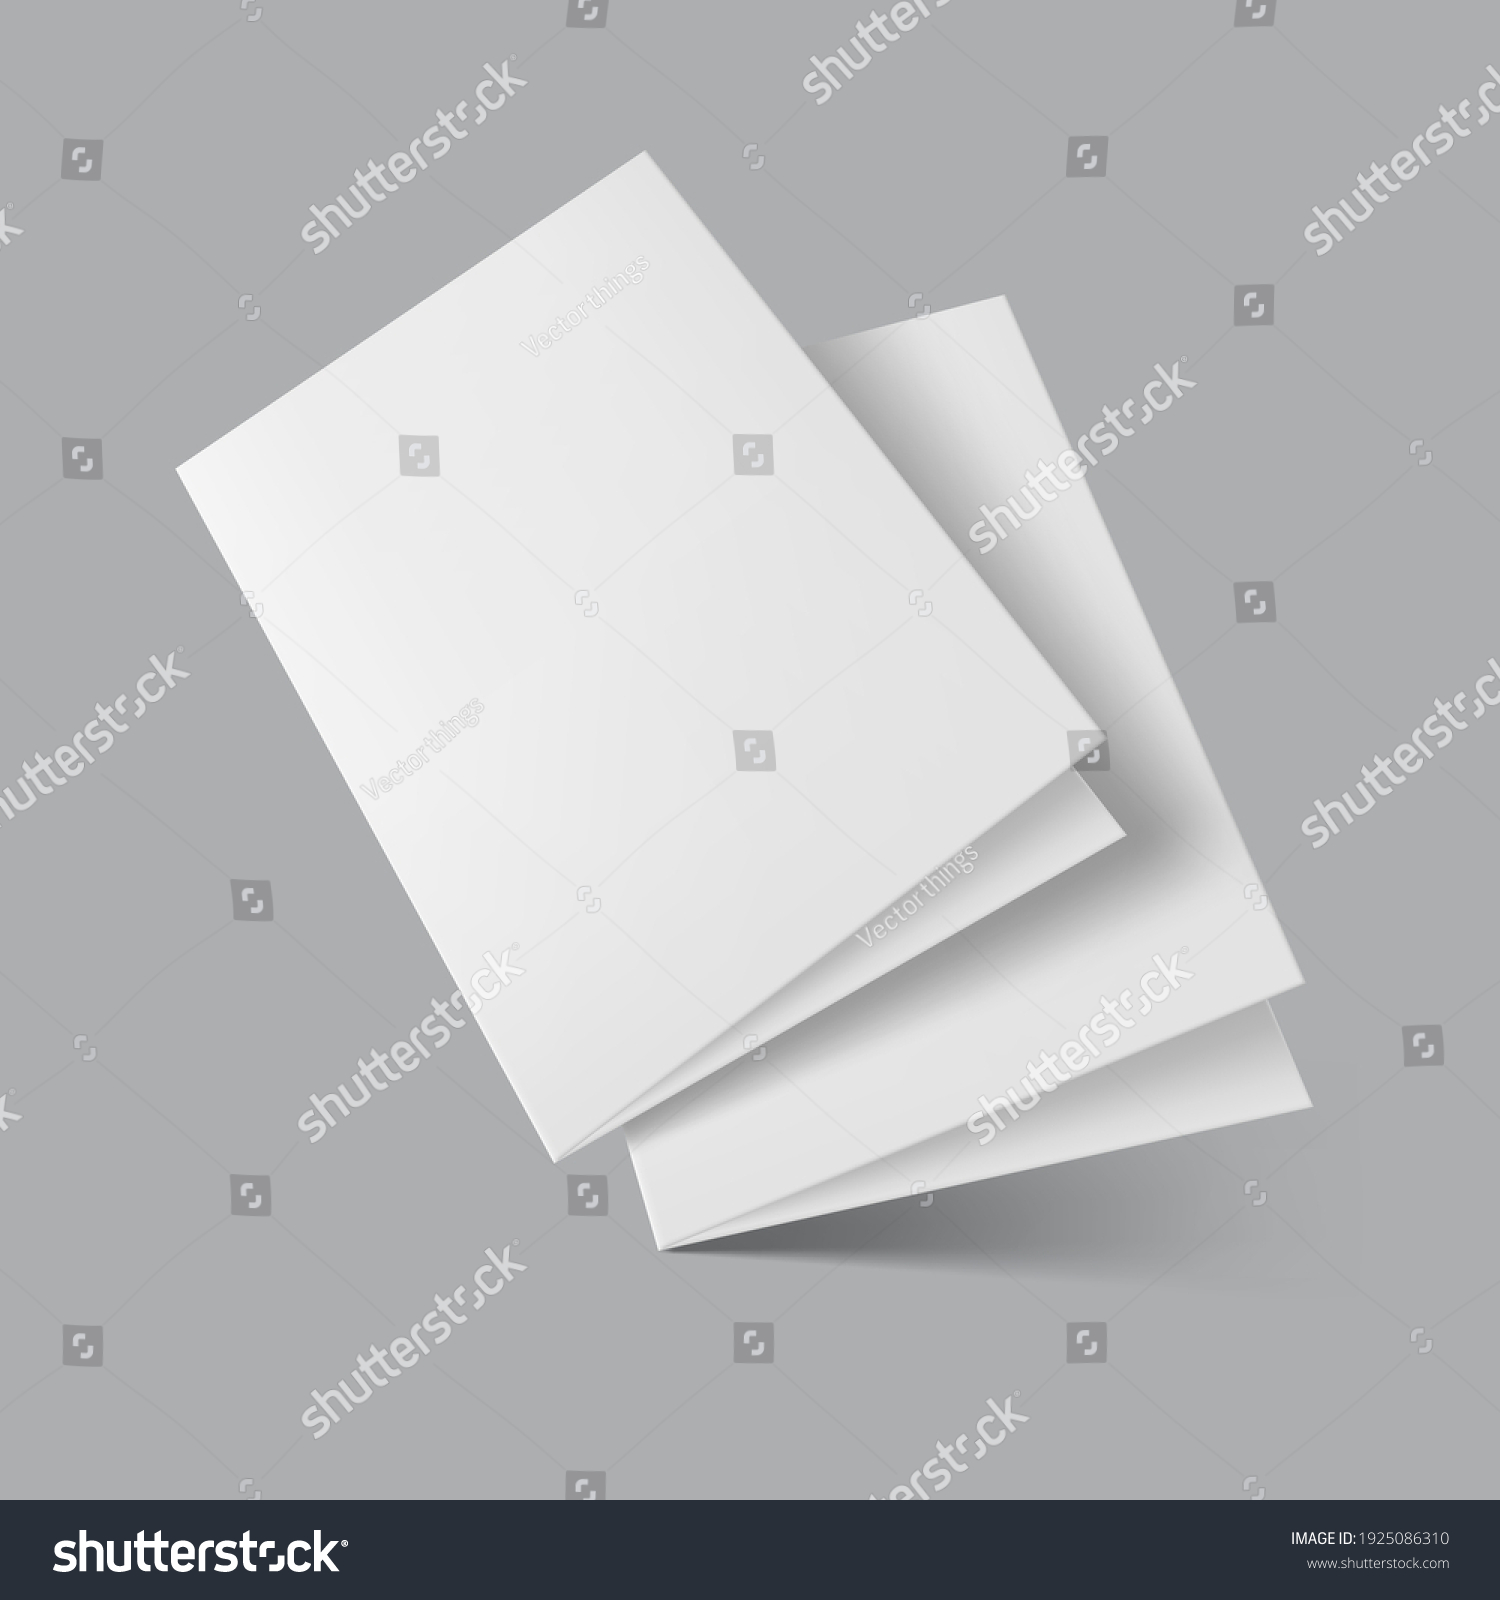 SVG of Two Blank Half Fold Brochure Template For Your Presentation. EPS10 Vector svg